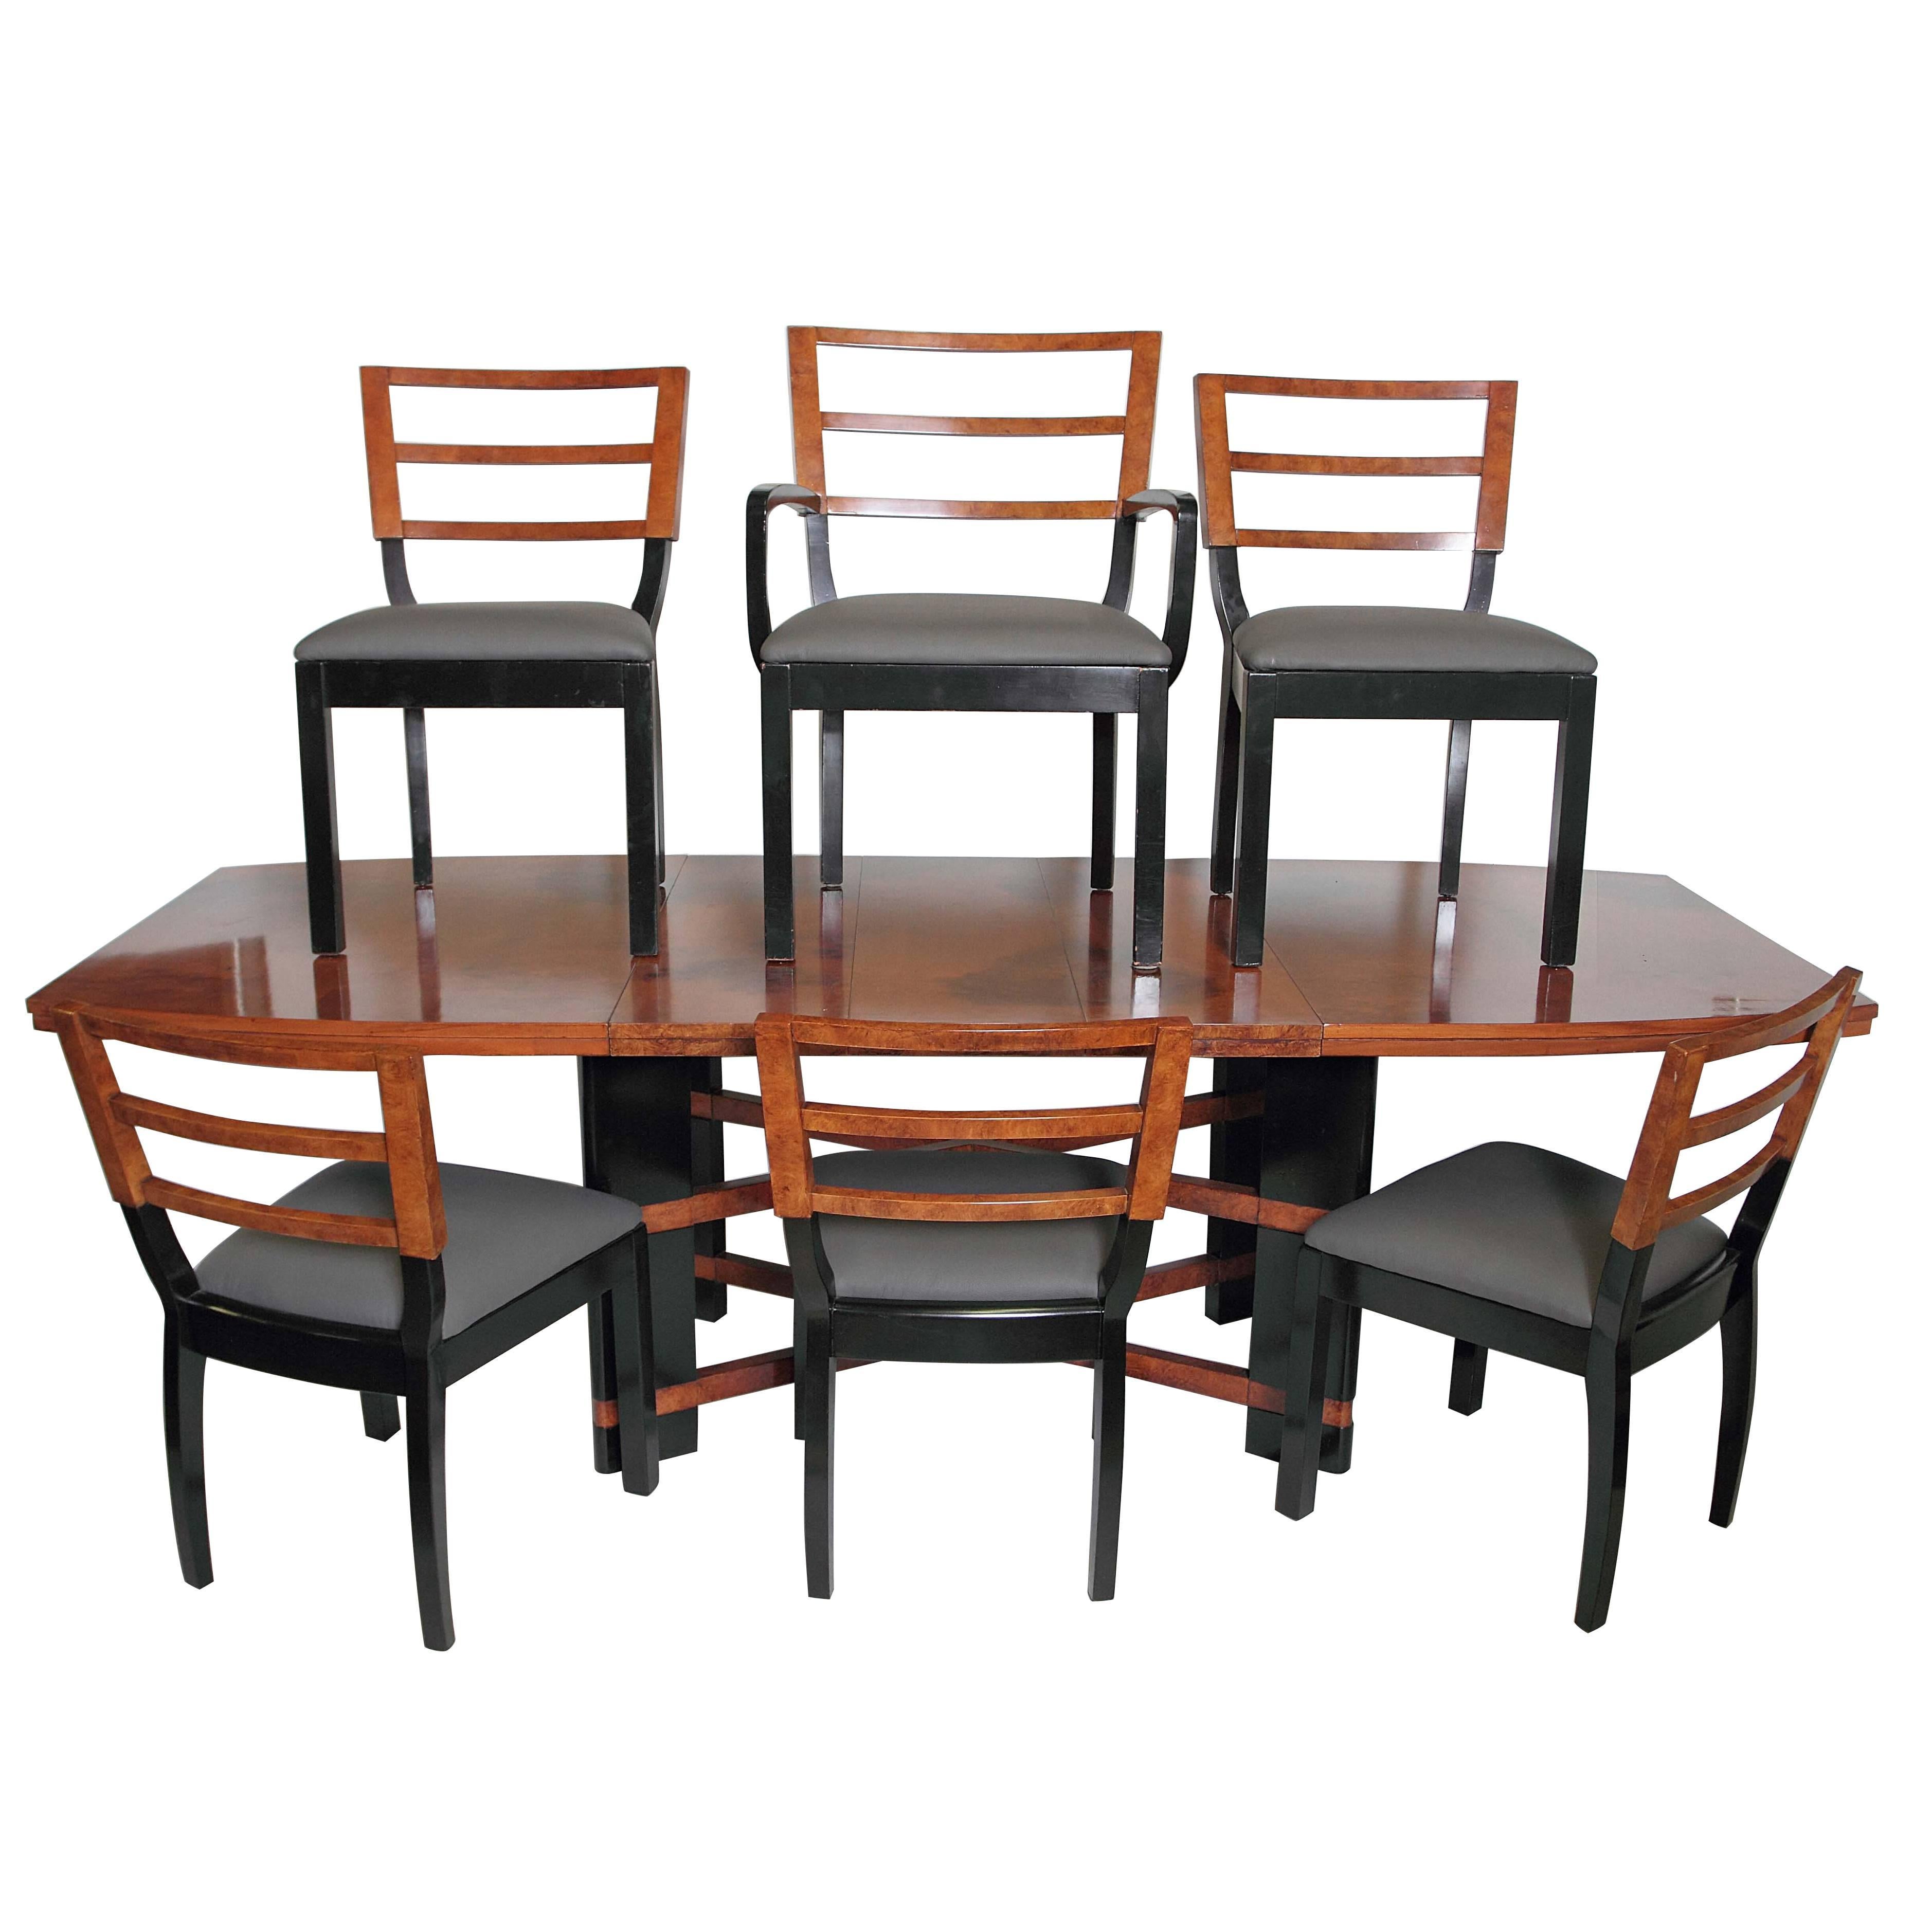 Art Deco Hastings Dining Table / Chairs Rare Double X-Base Teague / Deskey For Sale